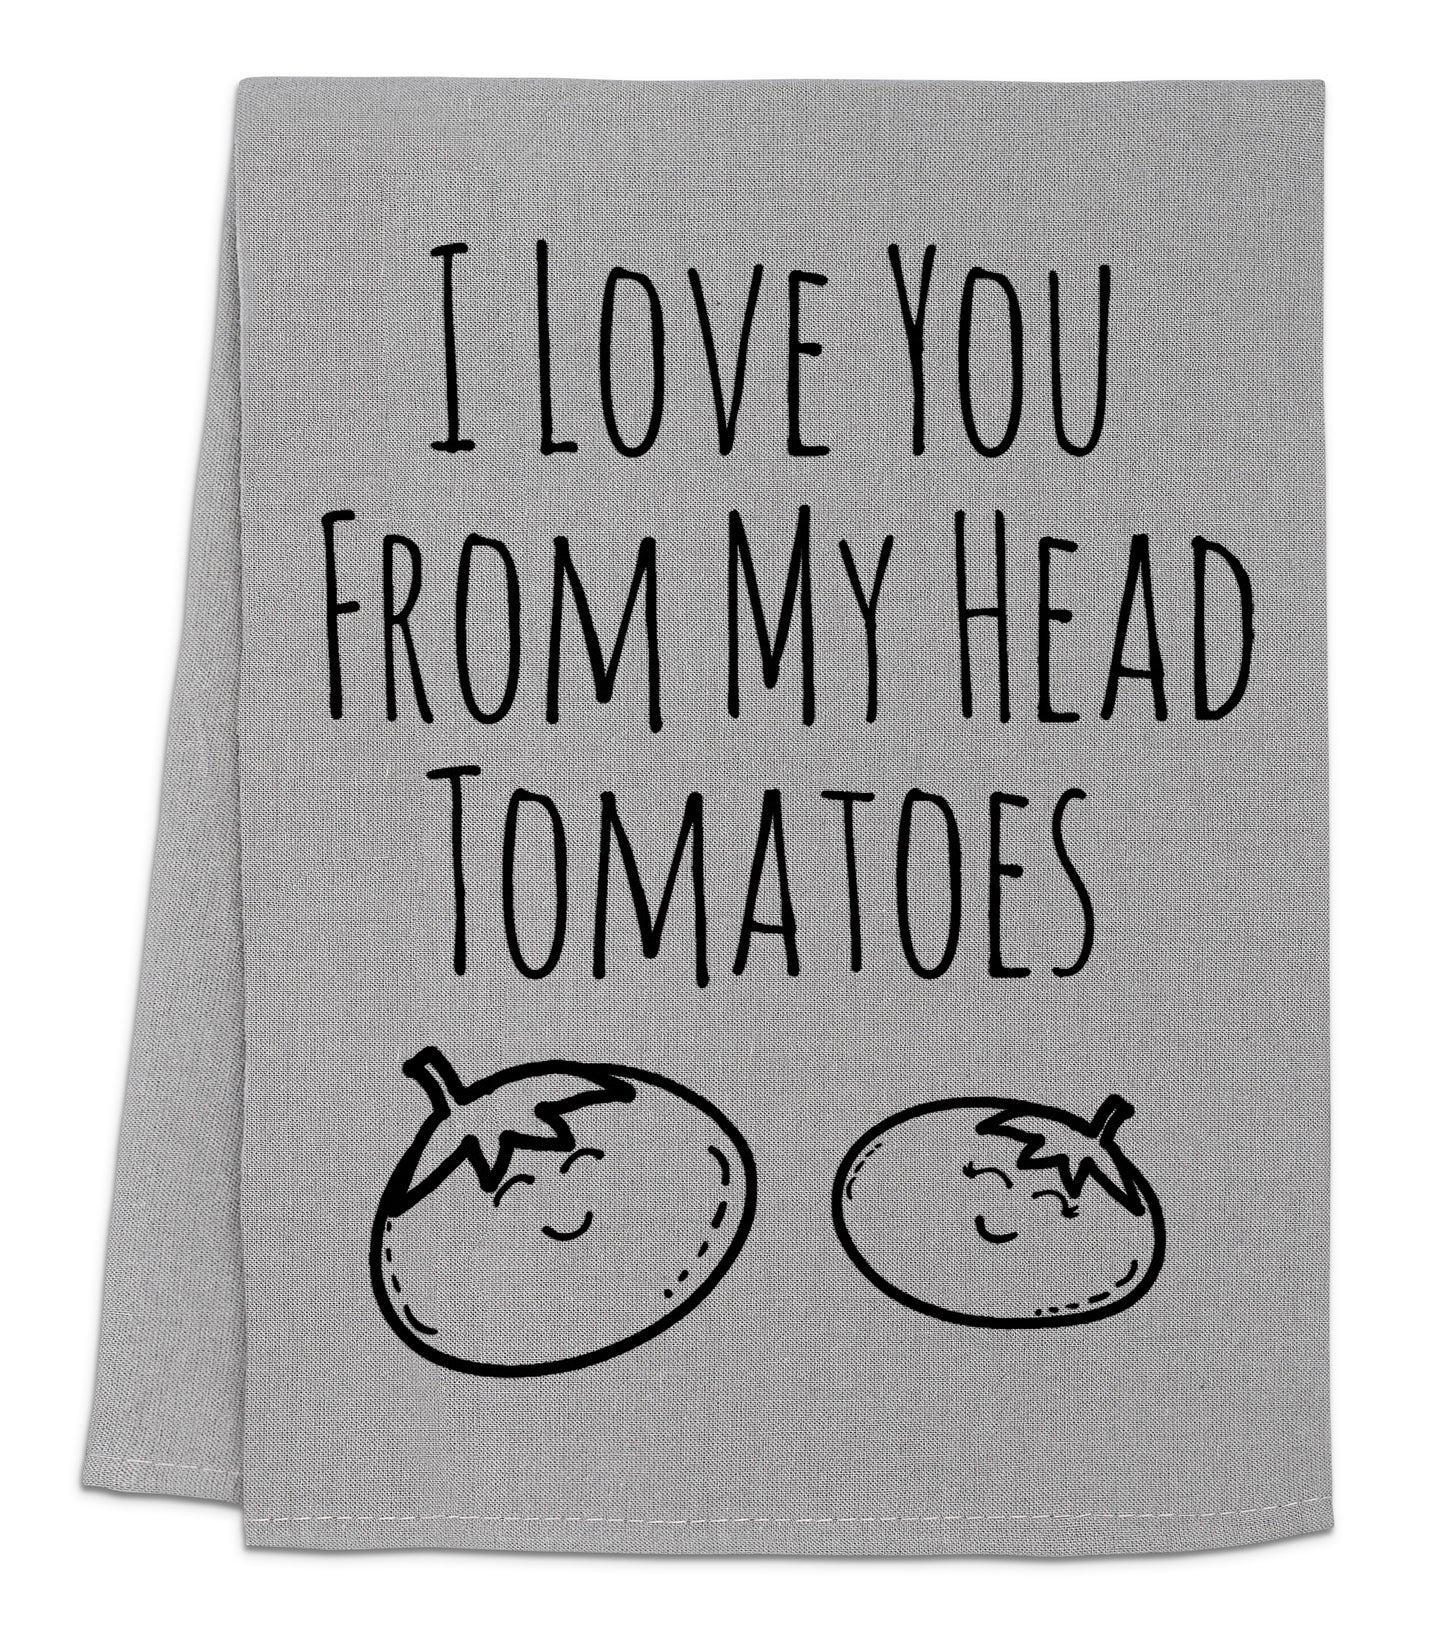 a towel that says i love you from my head tomatoes